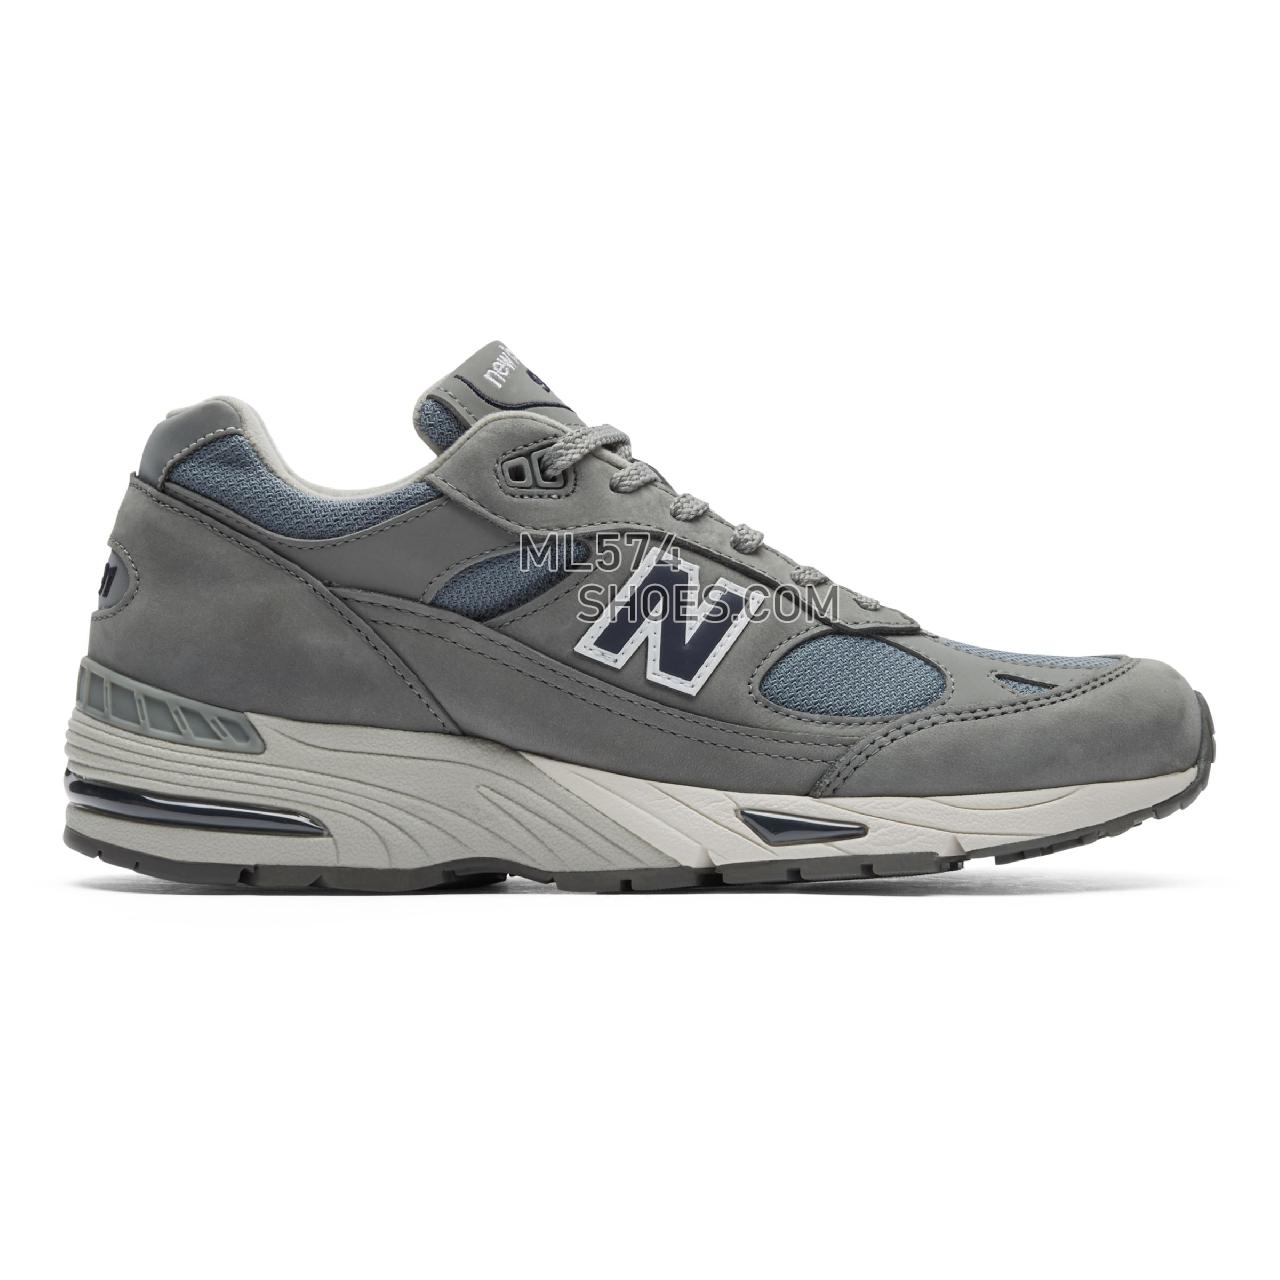 New Balance Made in UK 991 - Men's Made in UK 991 Classic - Grey with Navy - M991NGN